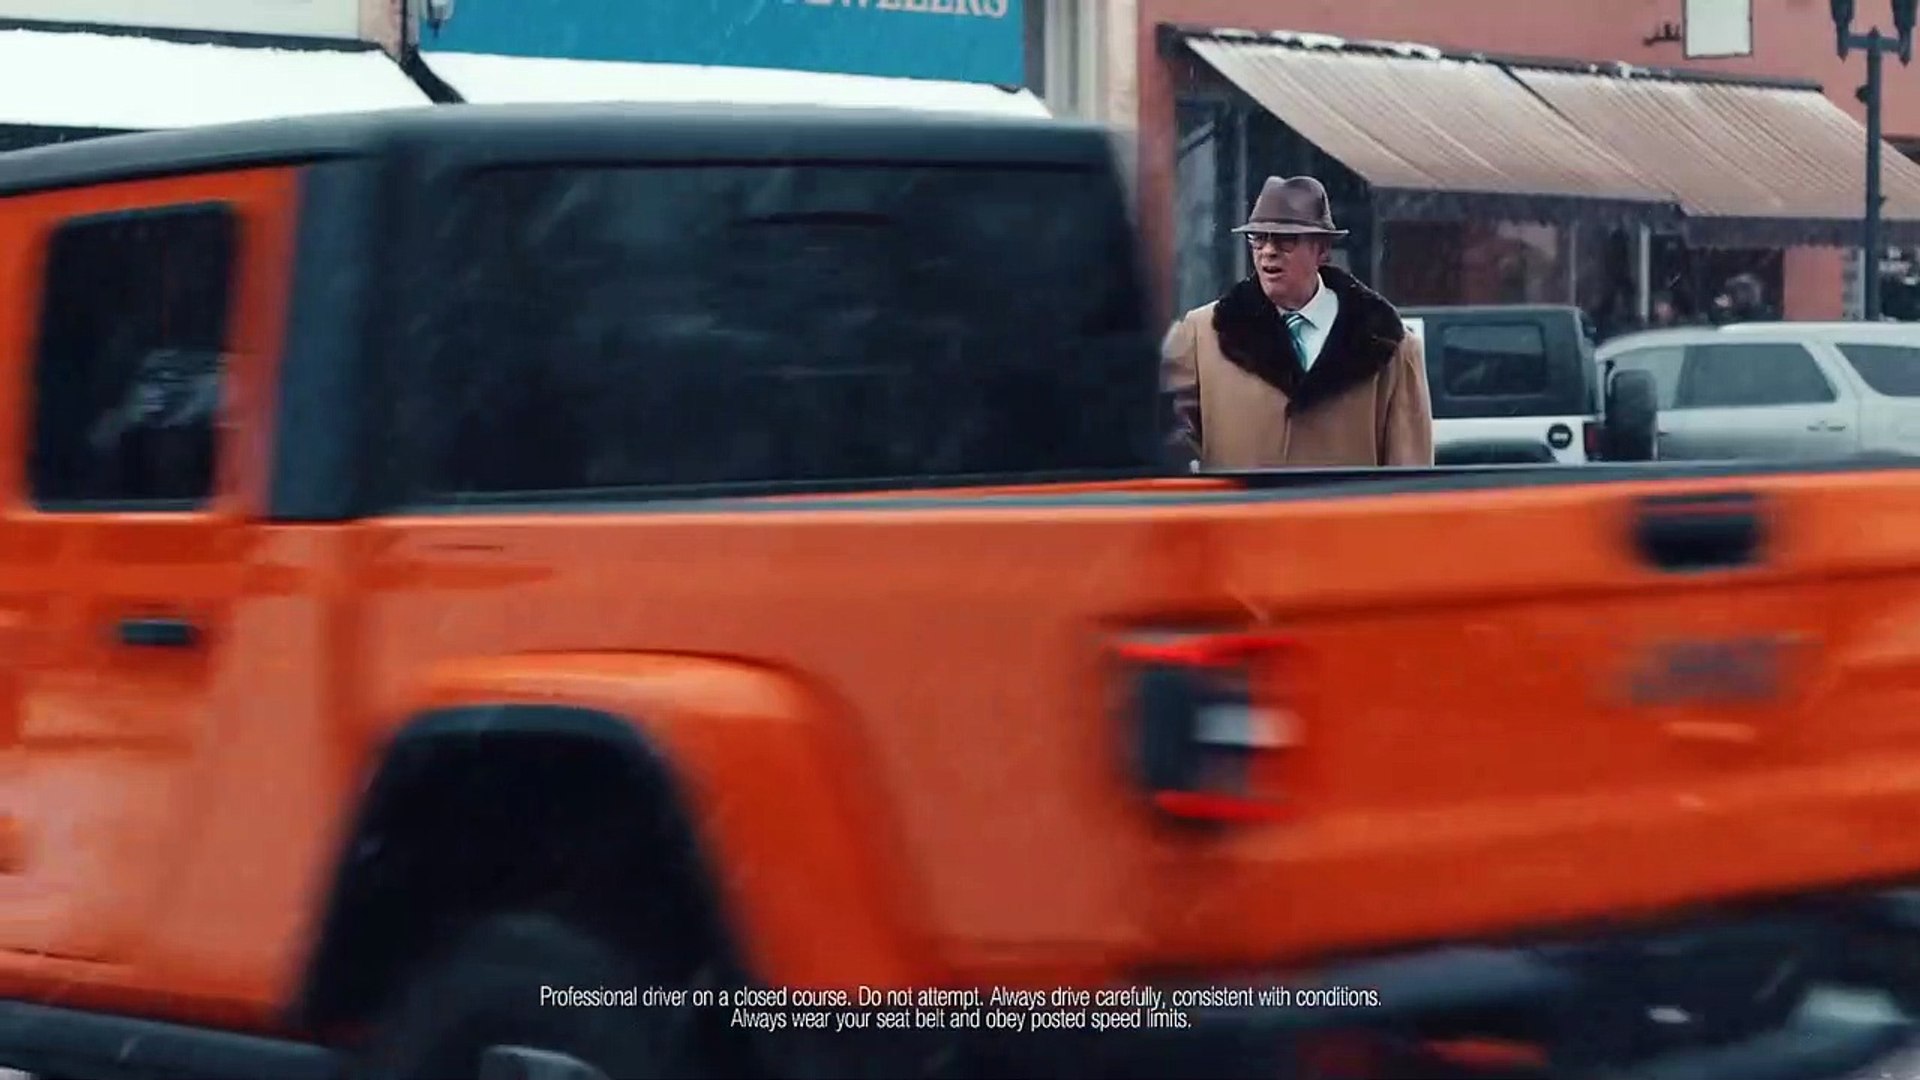 Jeep “Groundhog Day” Extended Super Bowl Commercial 2020 with Bill Murray